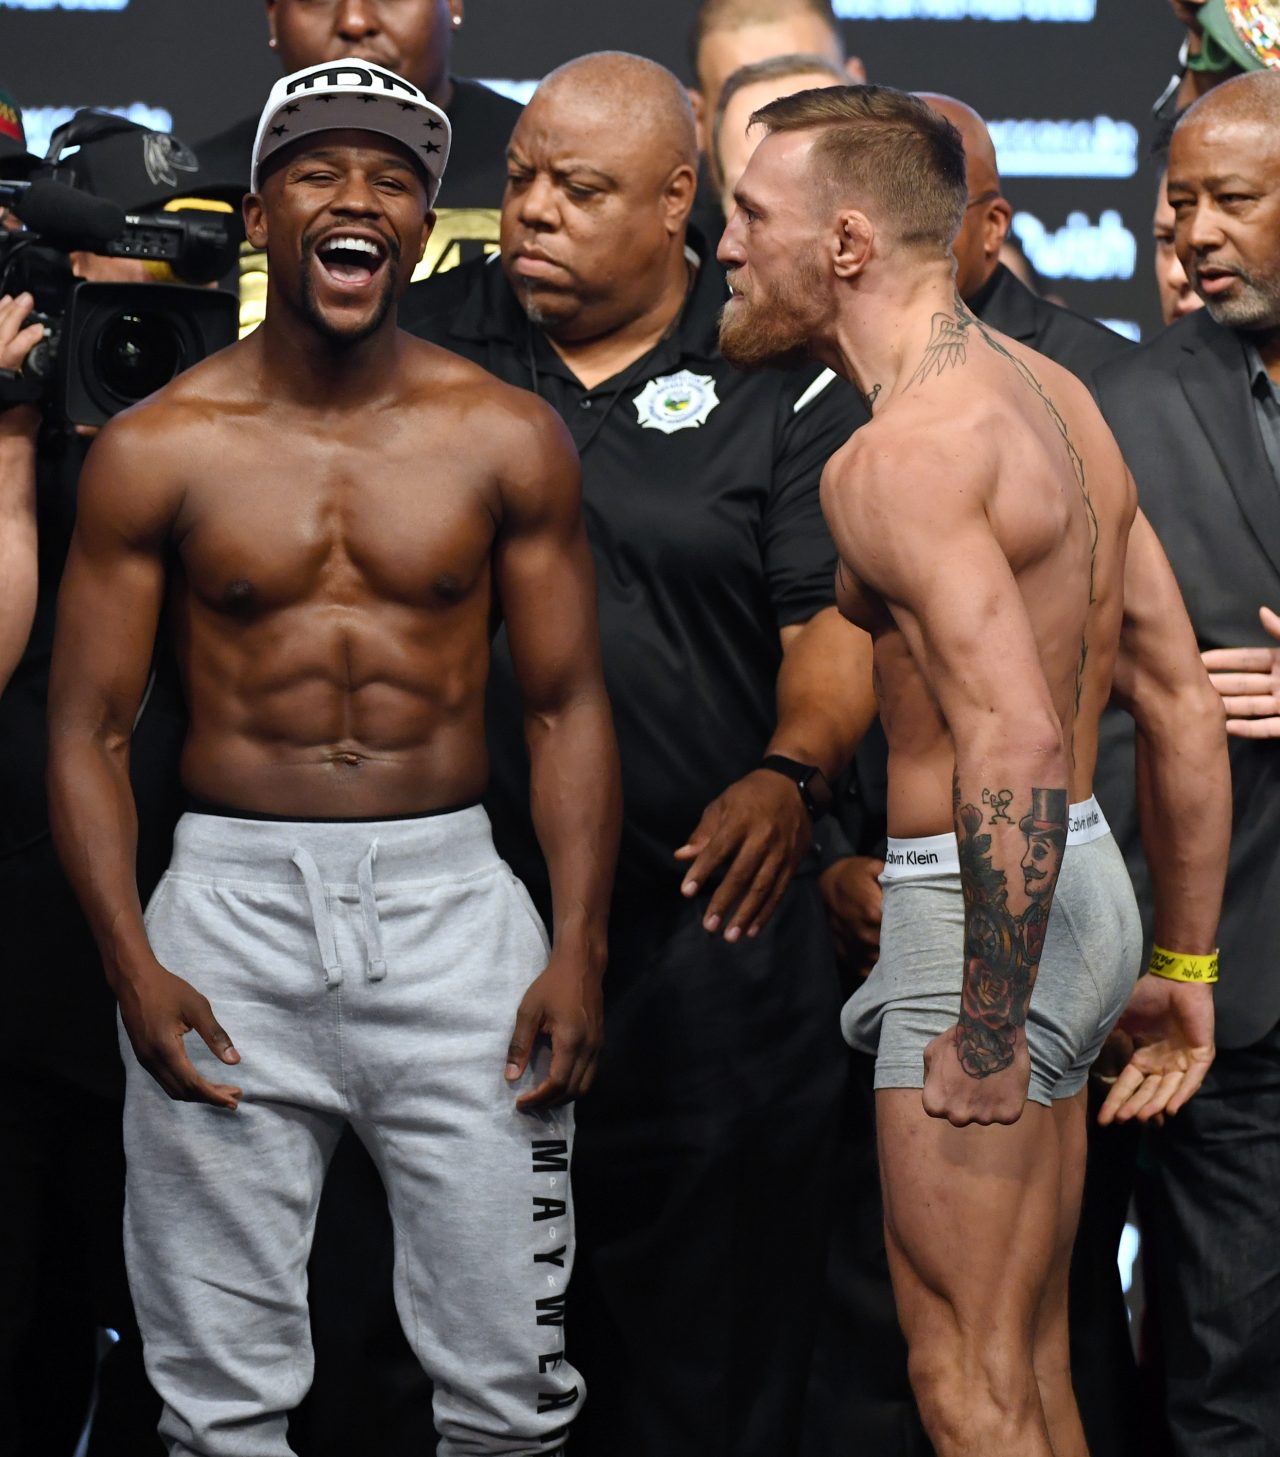 LAS VEGAS, NV - AUGUST 25:  Boxer Floyd Mayweather Jr. (L) laughs after facing off with UFC lightweight champion Conor McGregor during their official weigh-in at T-Mobile Arena on August 25, 2017 in Las Vegas, Nevada. The two will meet in a super welterweight boxing match at T-Mobile Arena on August 26.  (Photo by Ethan Miller/Getty Images)